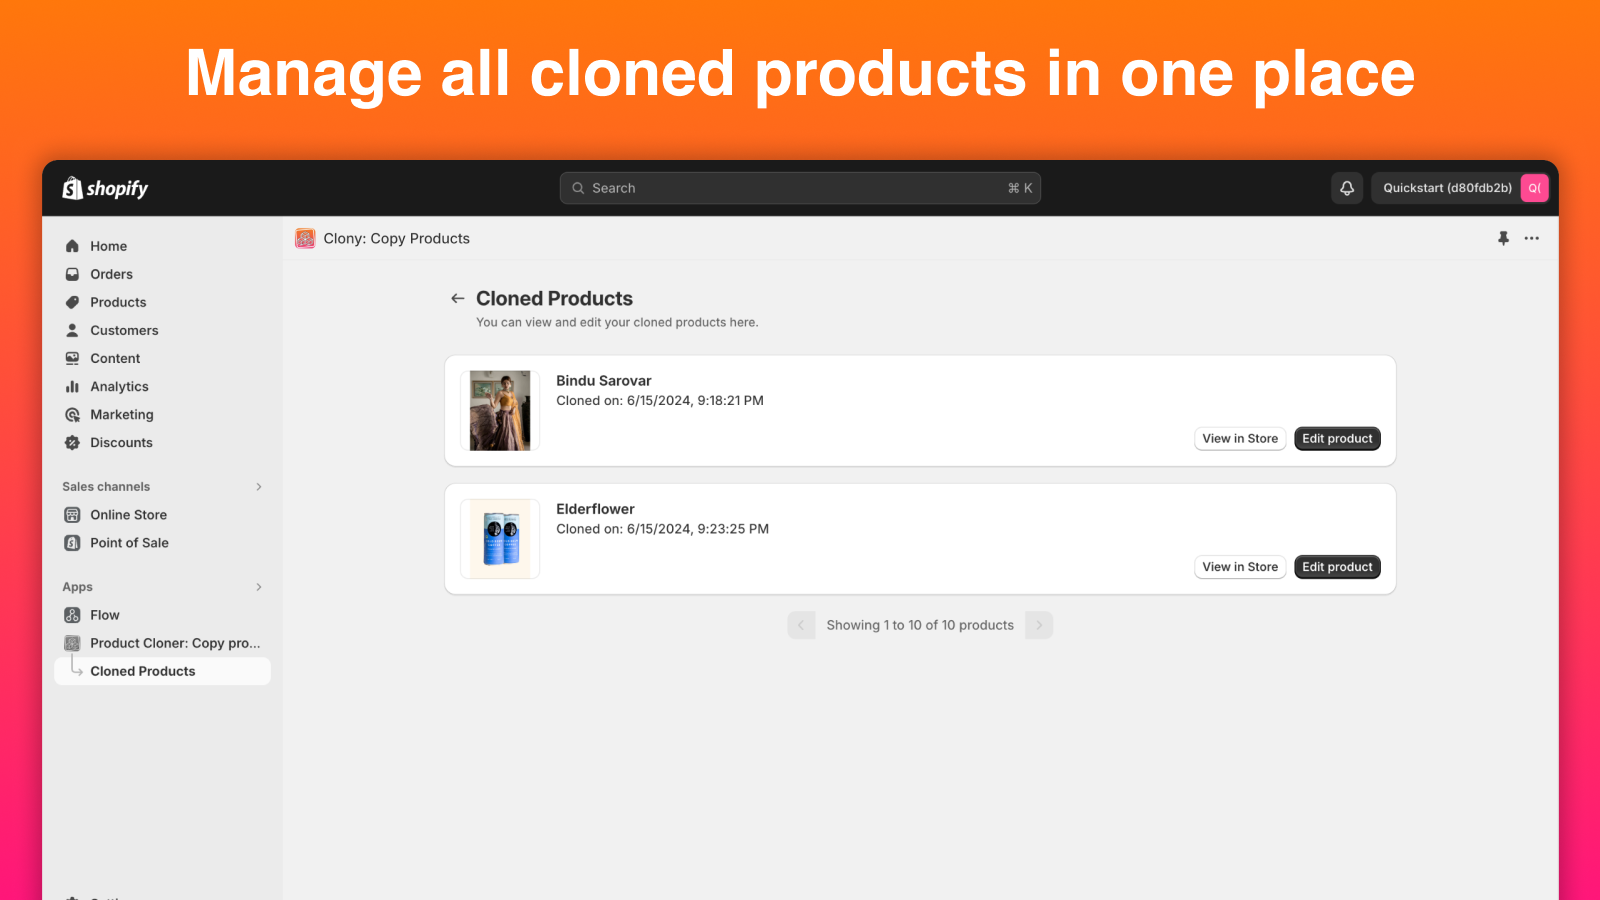 Manage all cloned products in one place